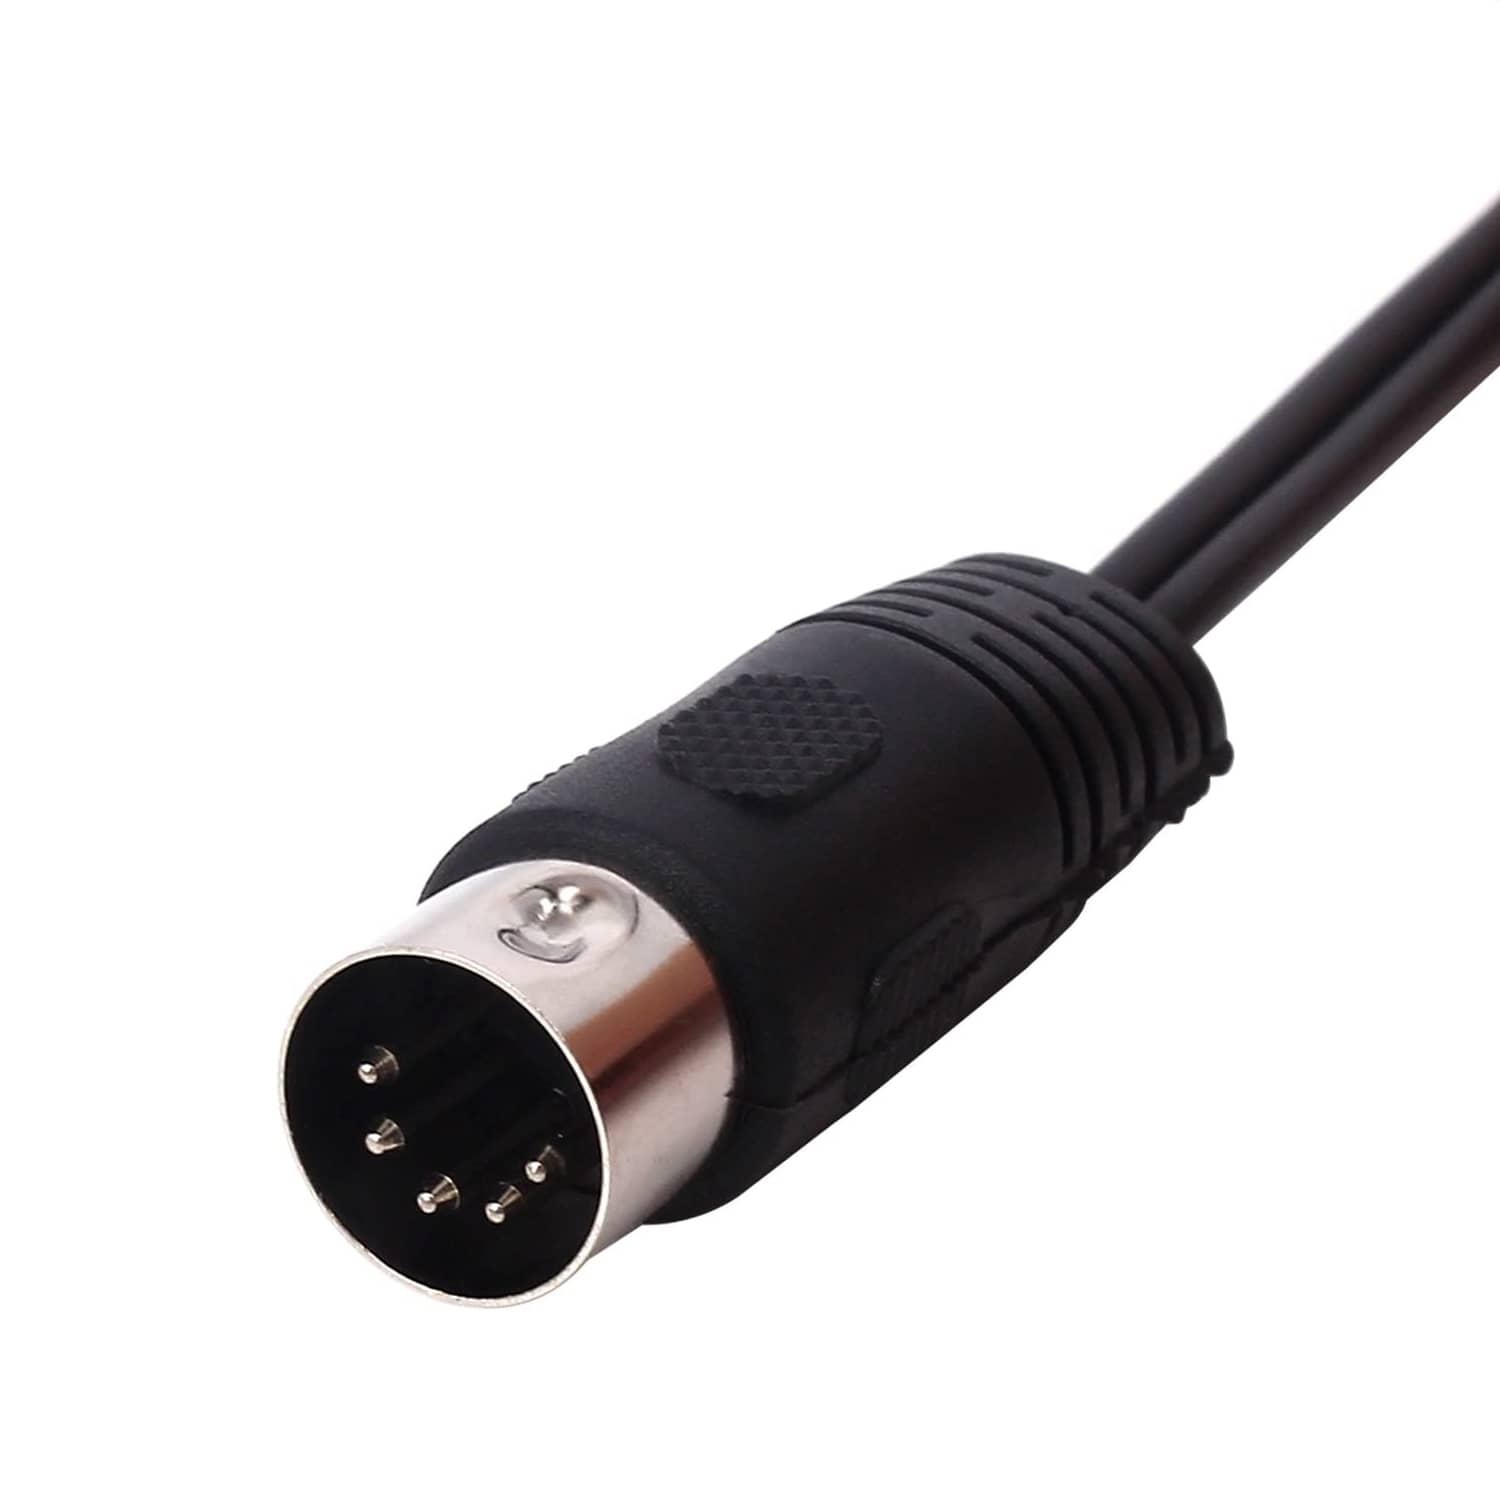 Cable Audio Estereo DIN 5 pines a RCA 1 M Negro